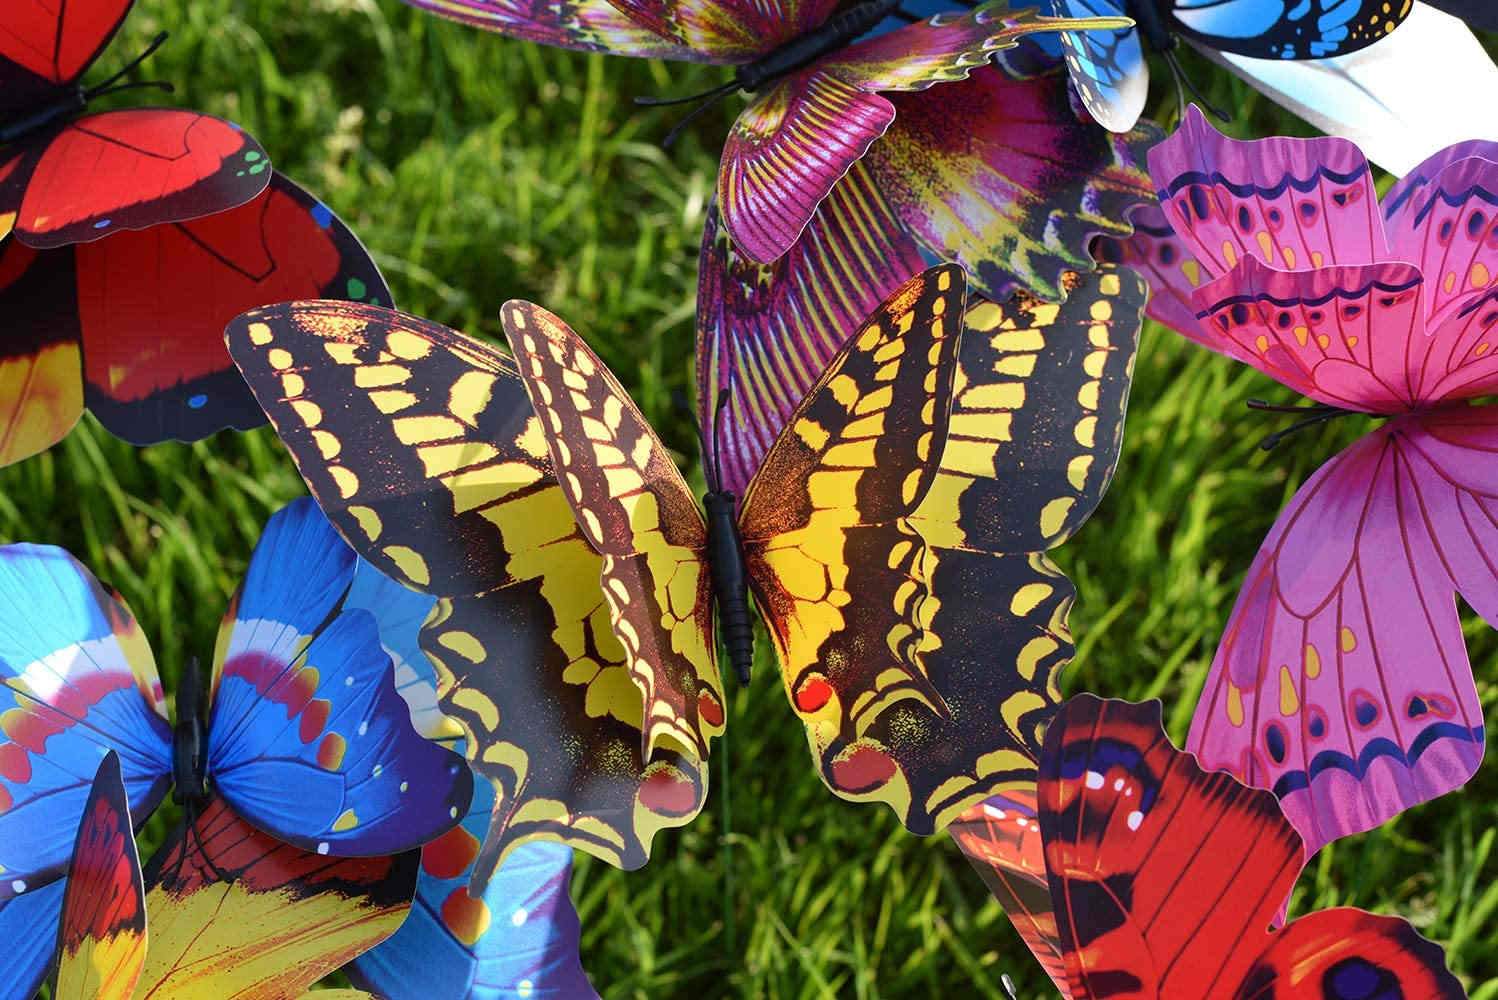 Giant Butterfly Garden Stakes Decorations